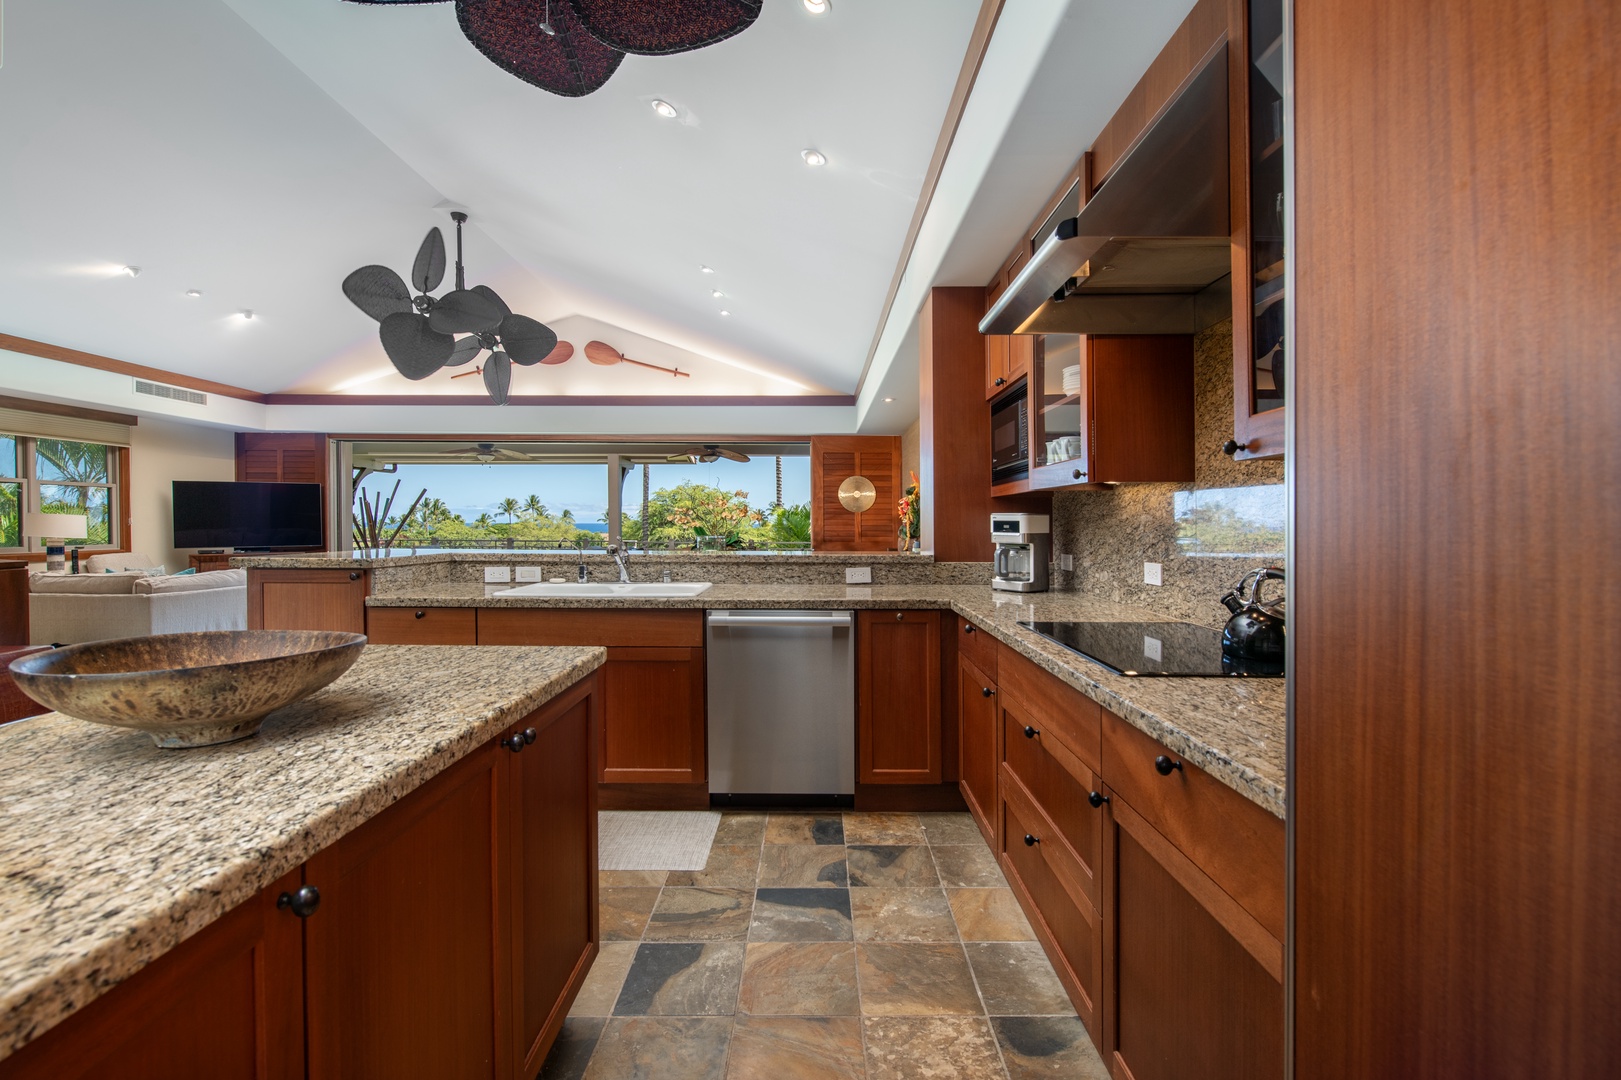 Kailua Kona Vacation Rentals, 3BD Ka'Ulu Villa (109A) at Four Seasons Resort at Hualalai - Sleek and elegant kitchen fully equipped with everything you could ever need for meals in.